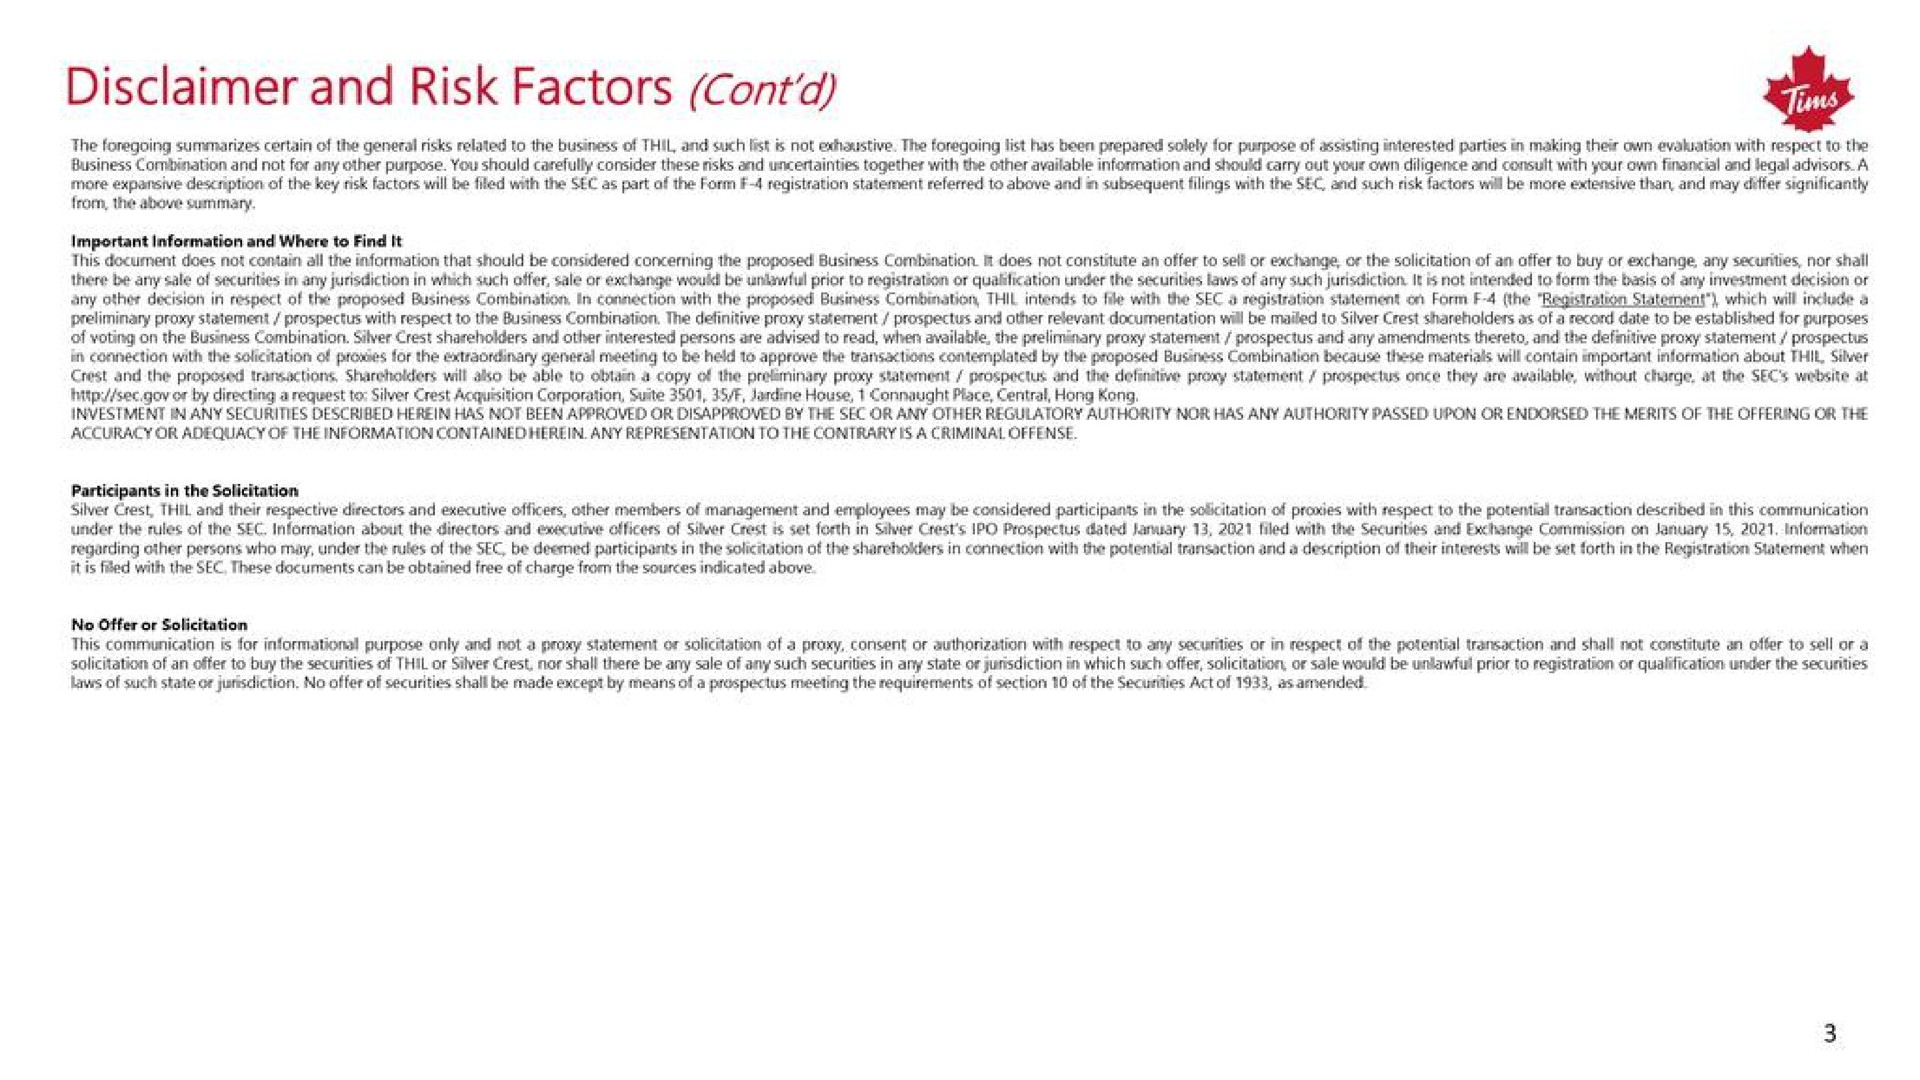 disclaimer and risk factors | Tim Hortons China